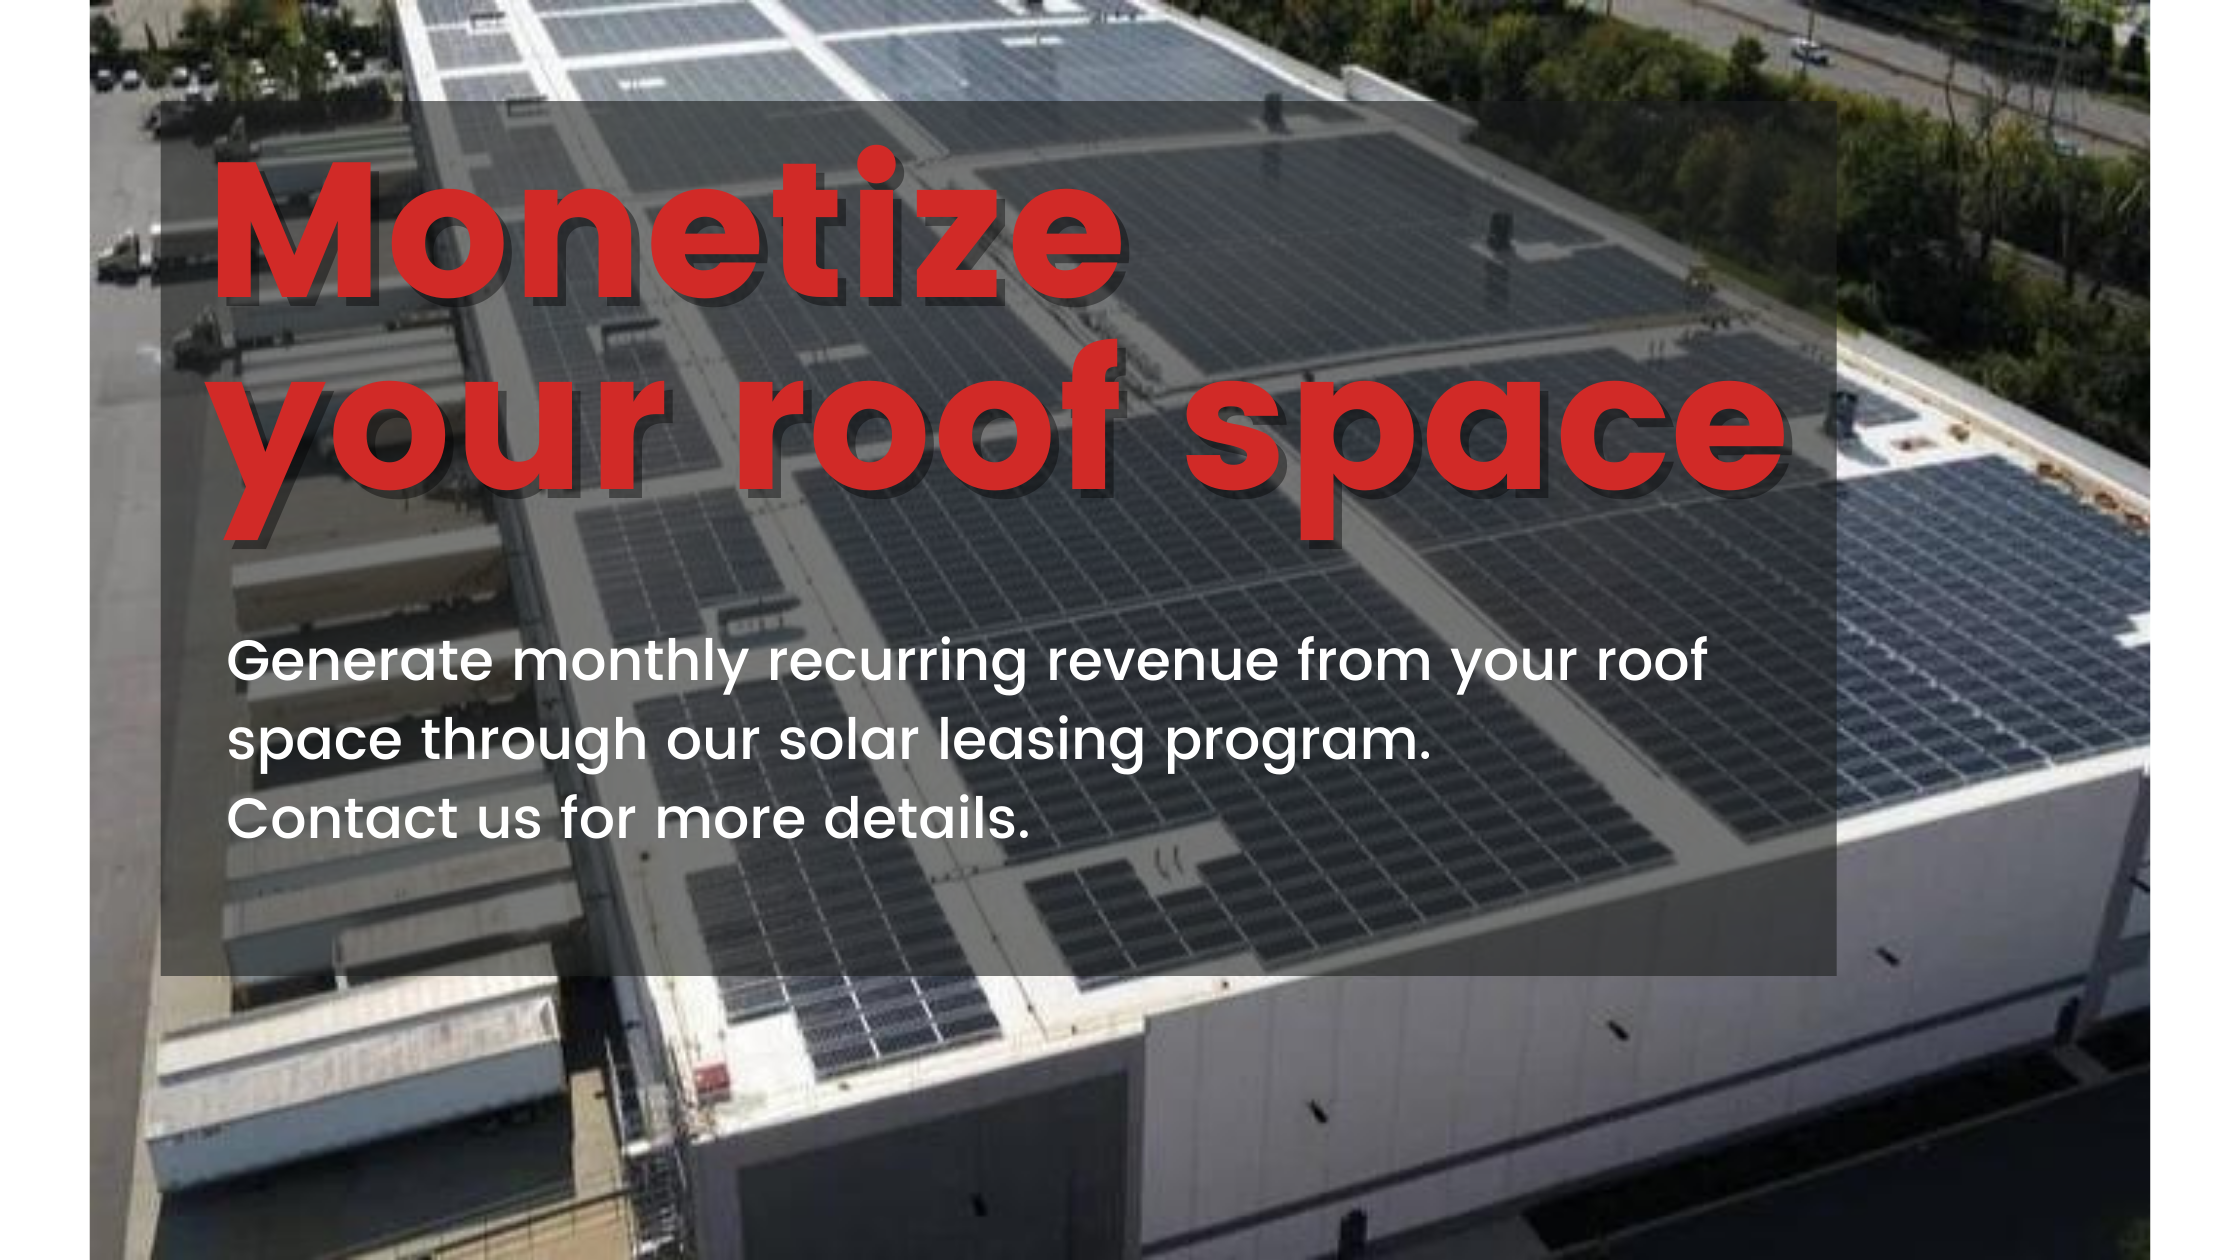 Monetize your roof space